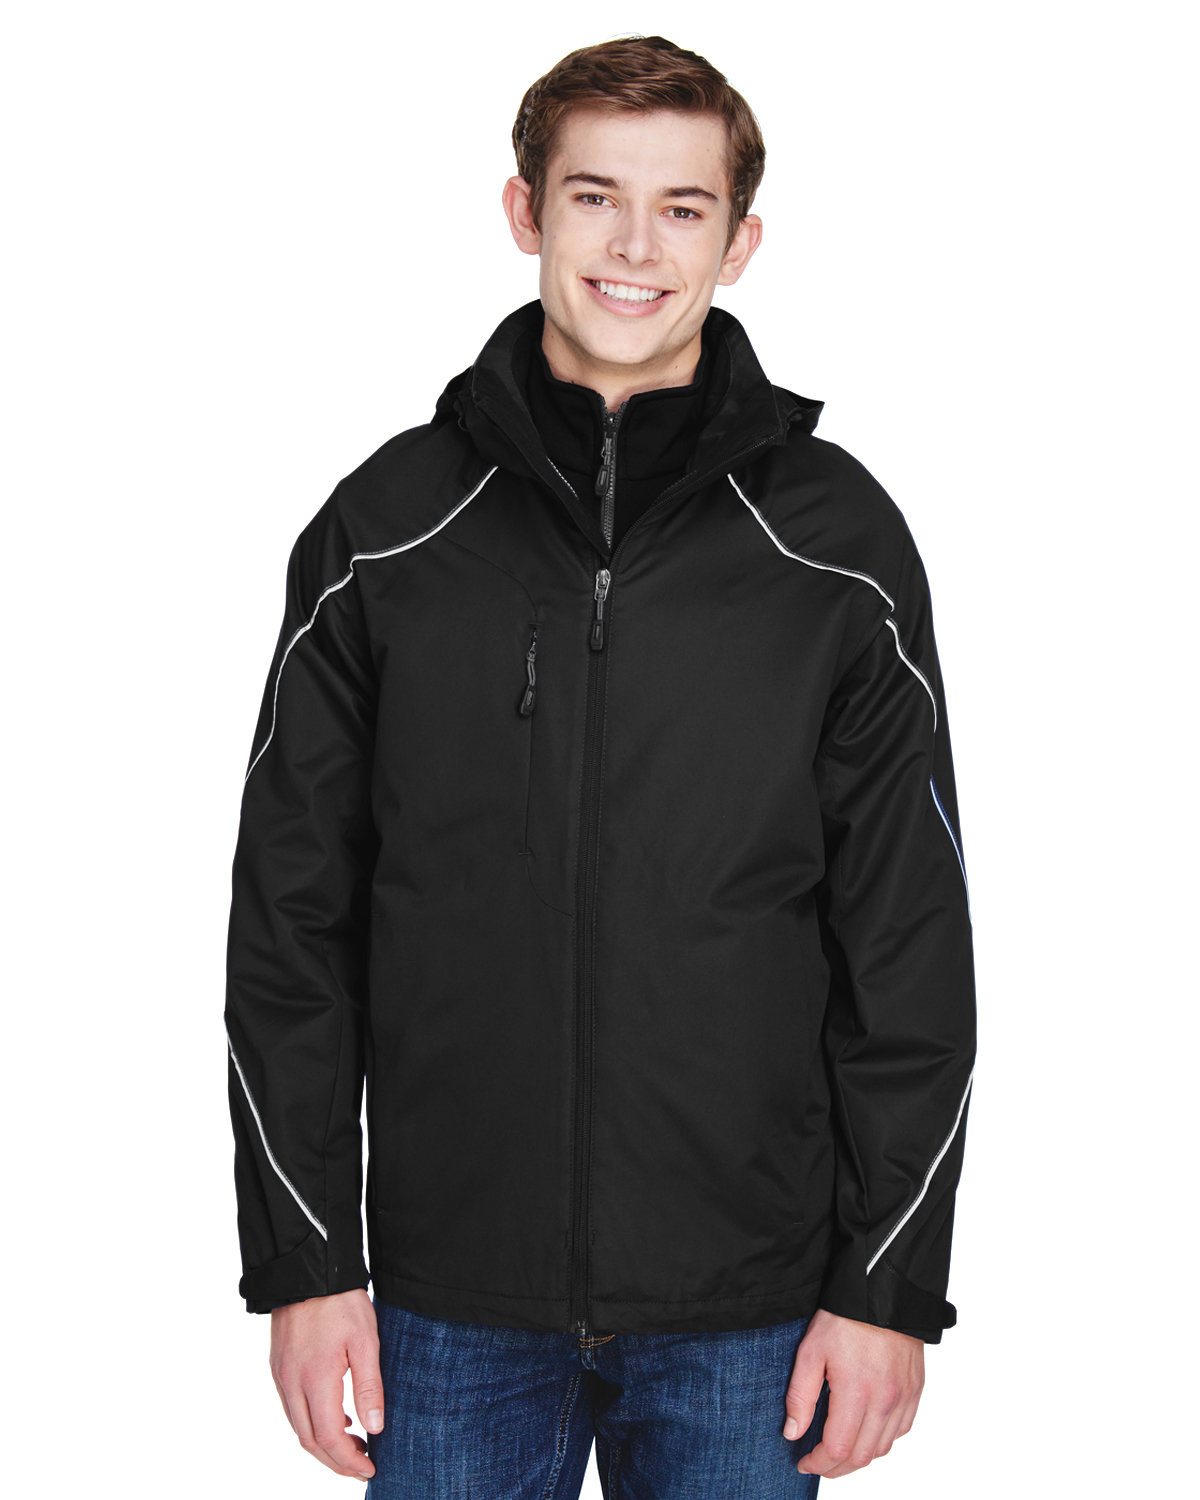 NORTH END 88196 Men’s Angle 3-in-1 Jacket with Bonded Fleece Liner ...